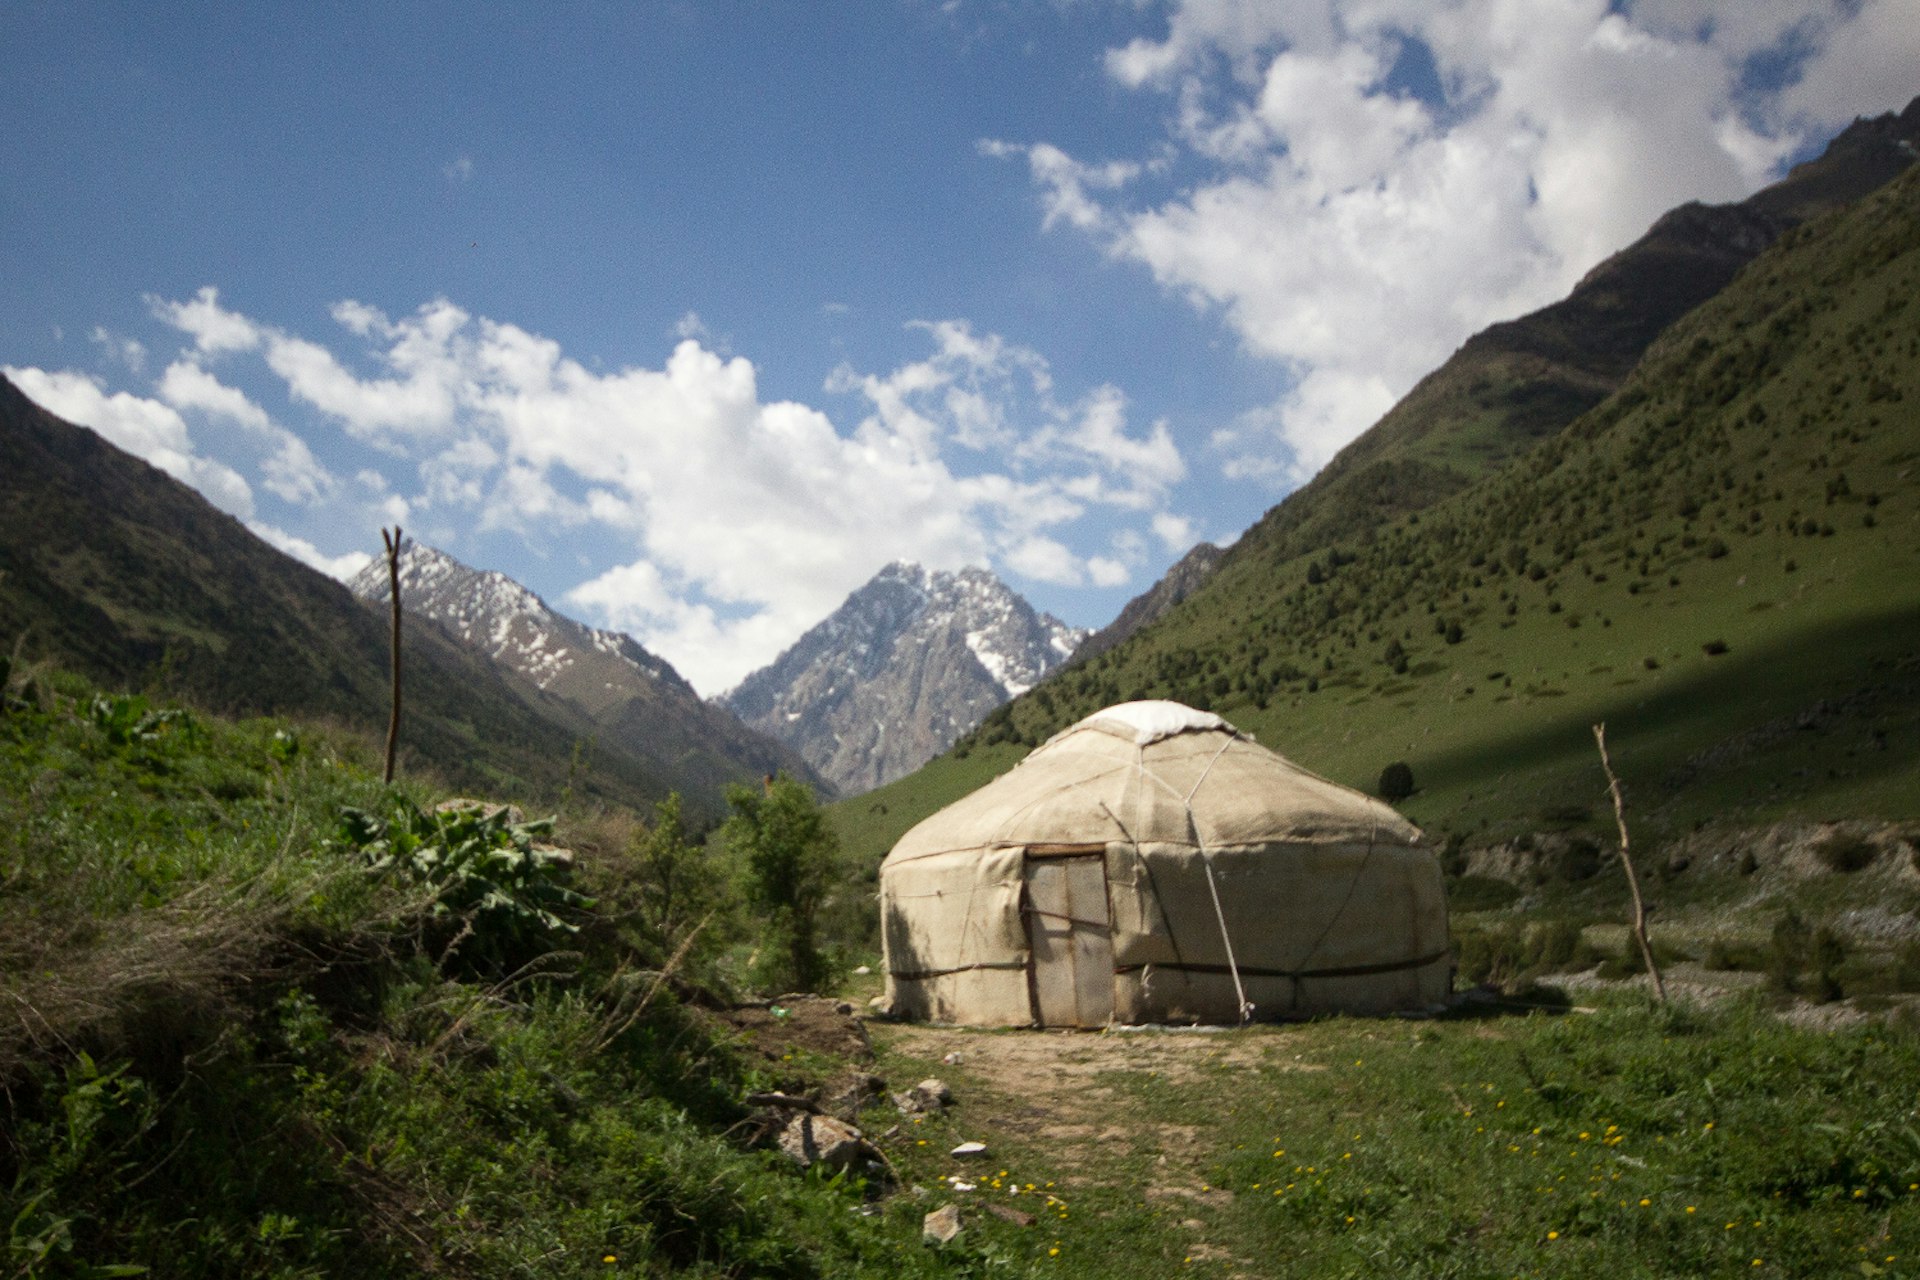 Nomad life: overnight in a mountain yurt in Kyrgyzstan. Image by Stephen Lioy / Lonely Planet